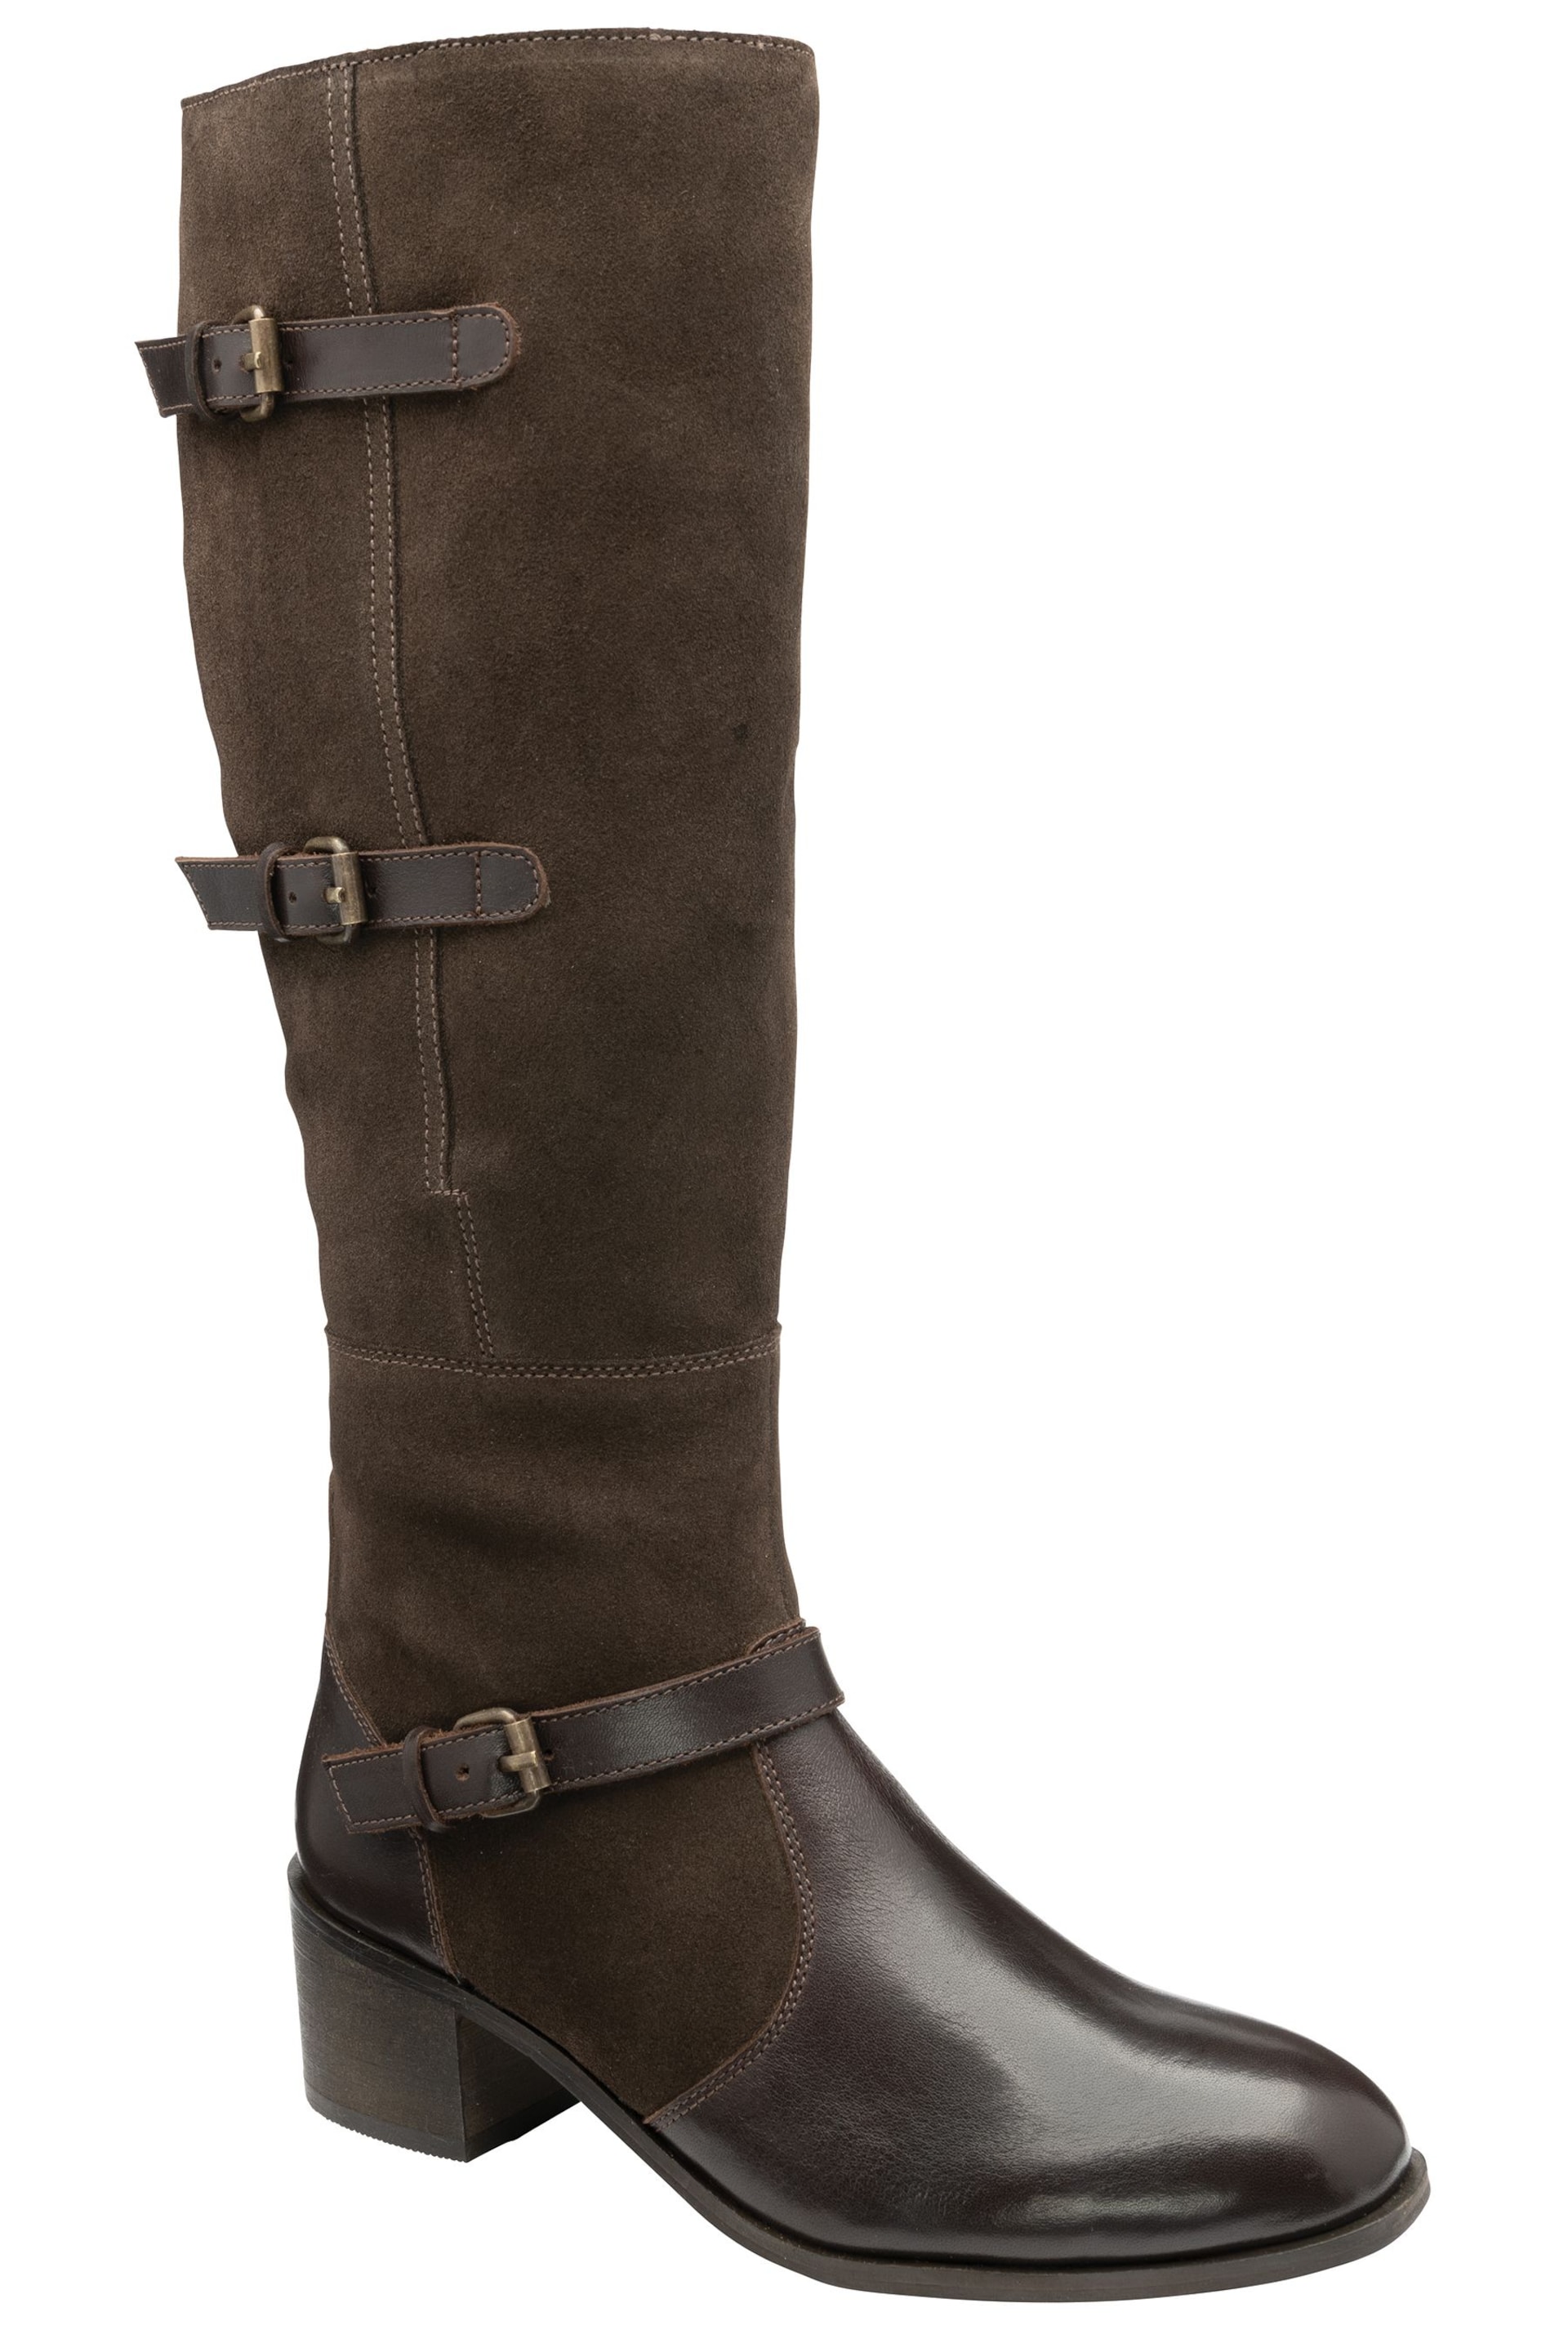 Ravel Brown Leather & Suede Zip-Up Knee High Boots - Image 1 of 4